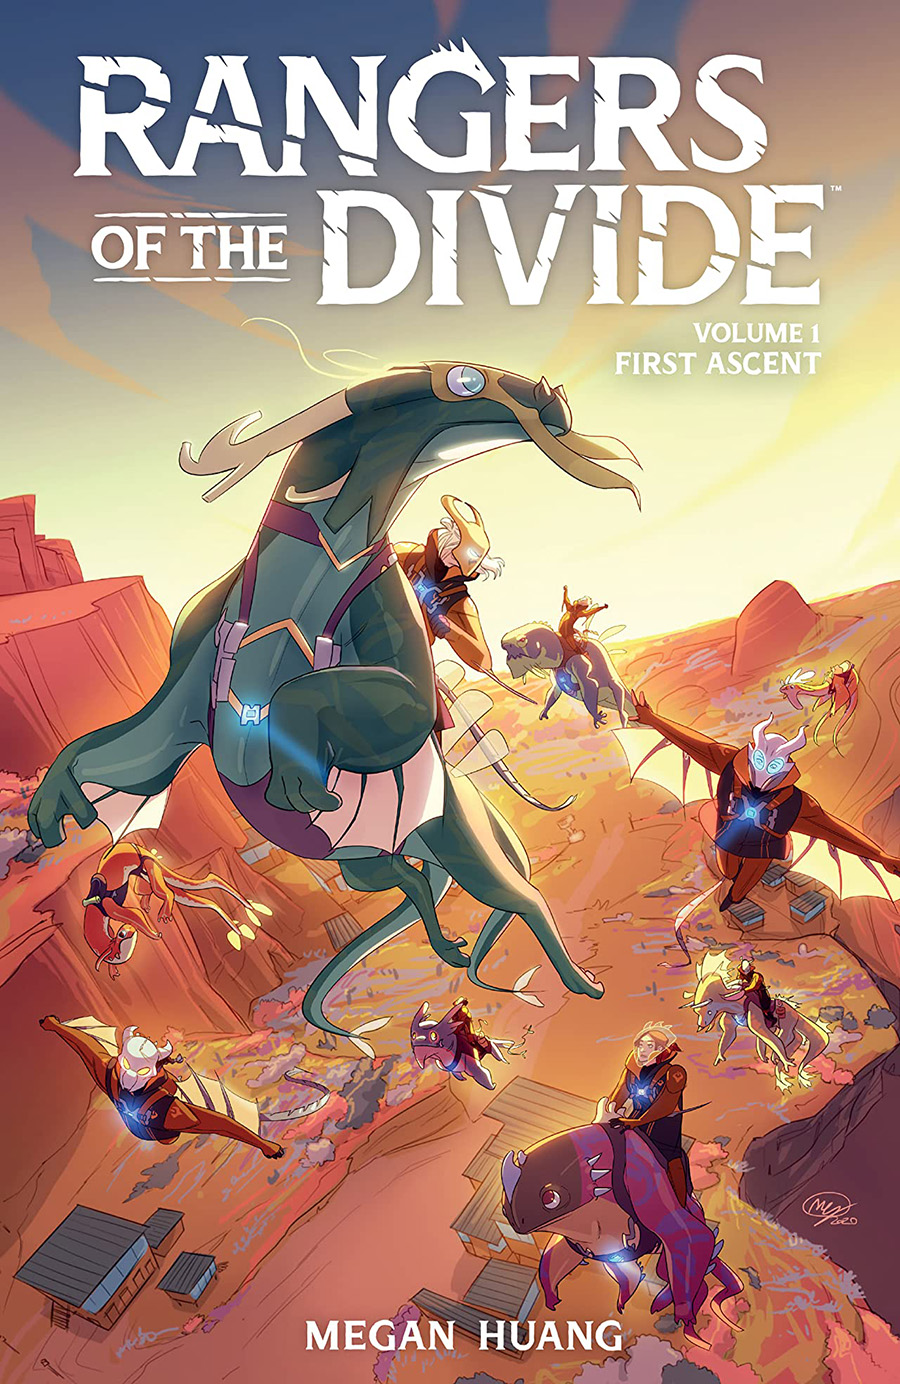 Rangers Of The Divide Vol 1 First Ascent TP